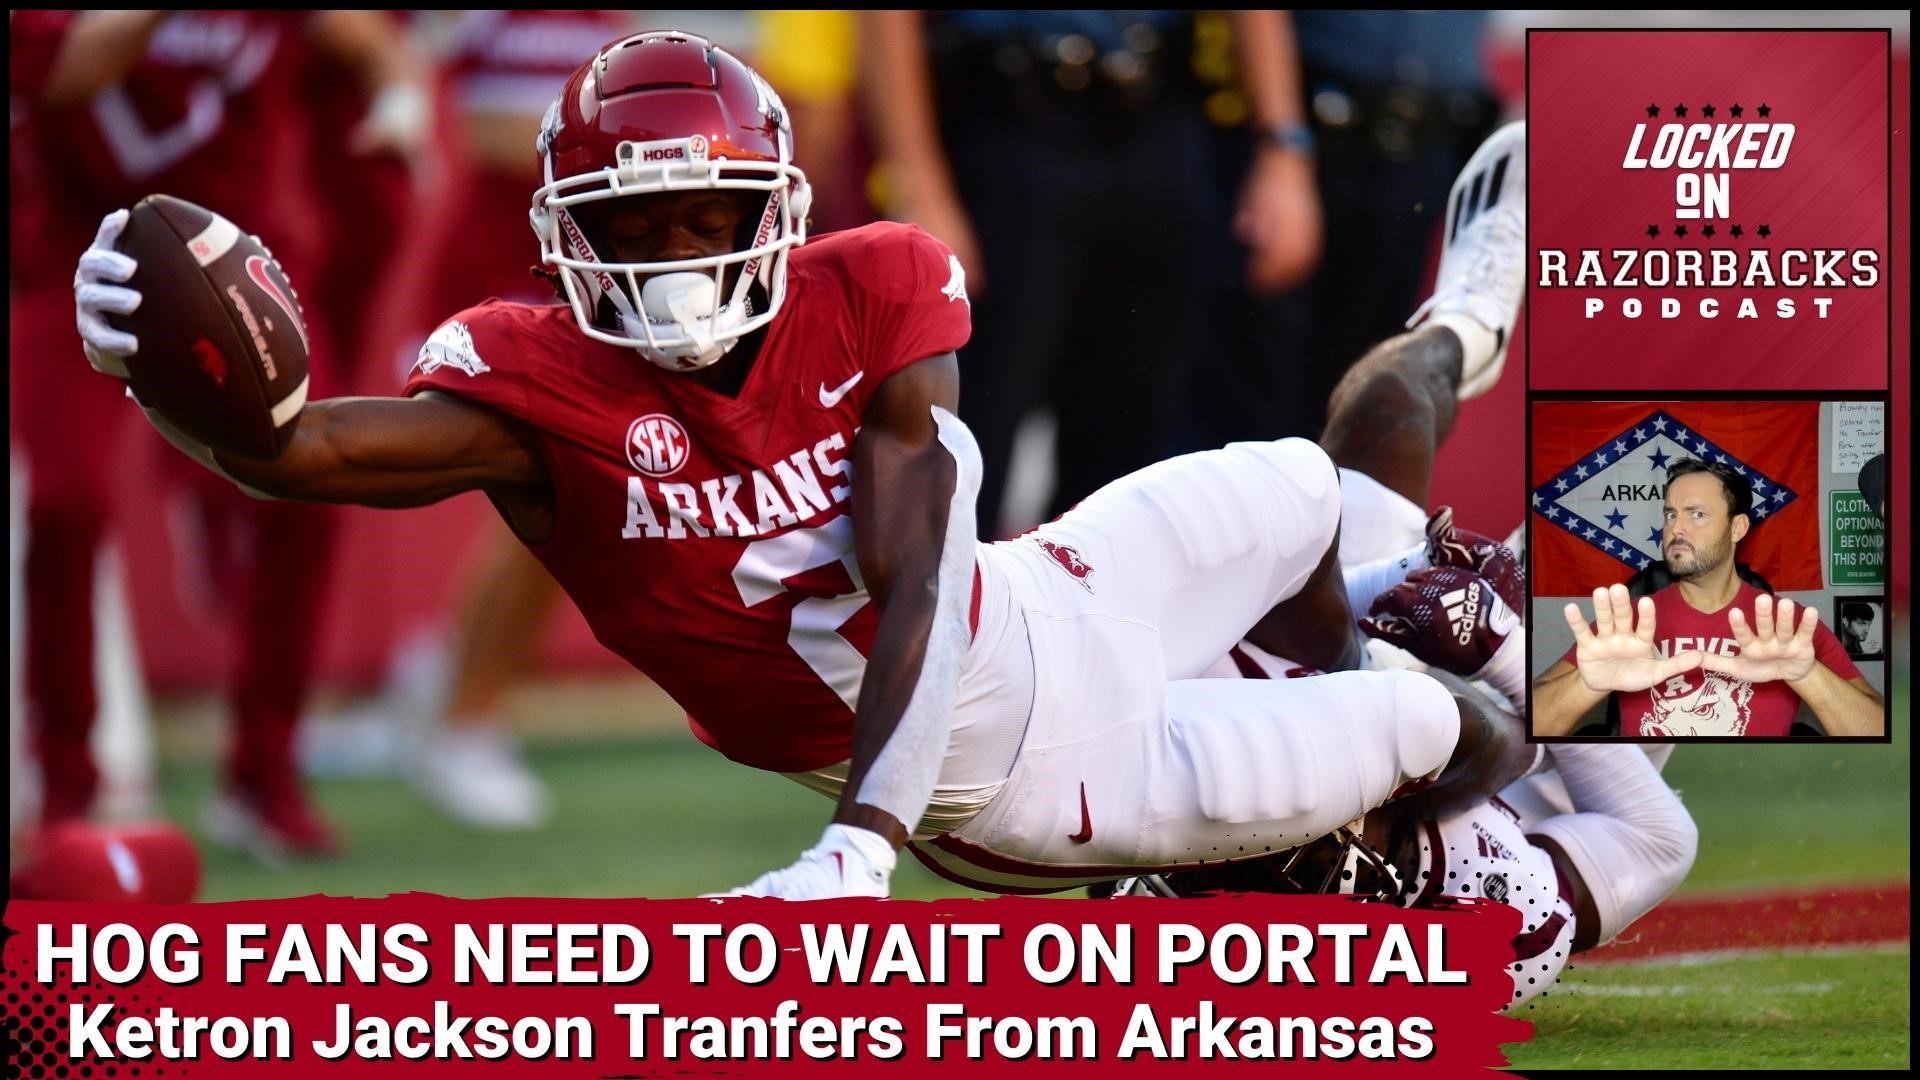 John Nabors discusses the transfer portal insanity from the opening Monday, why Razorback fans need to just wait and see.